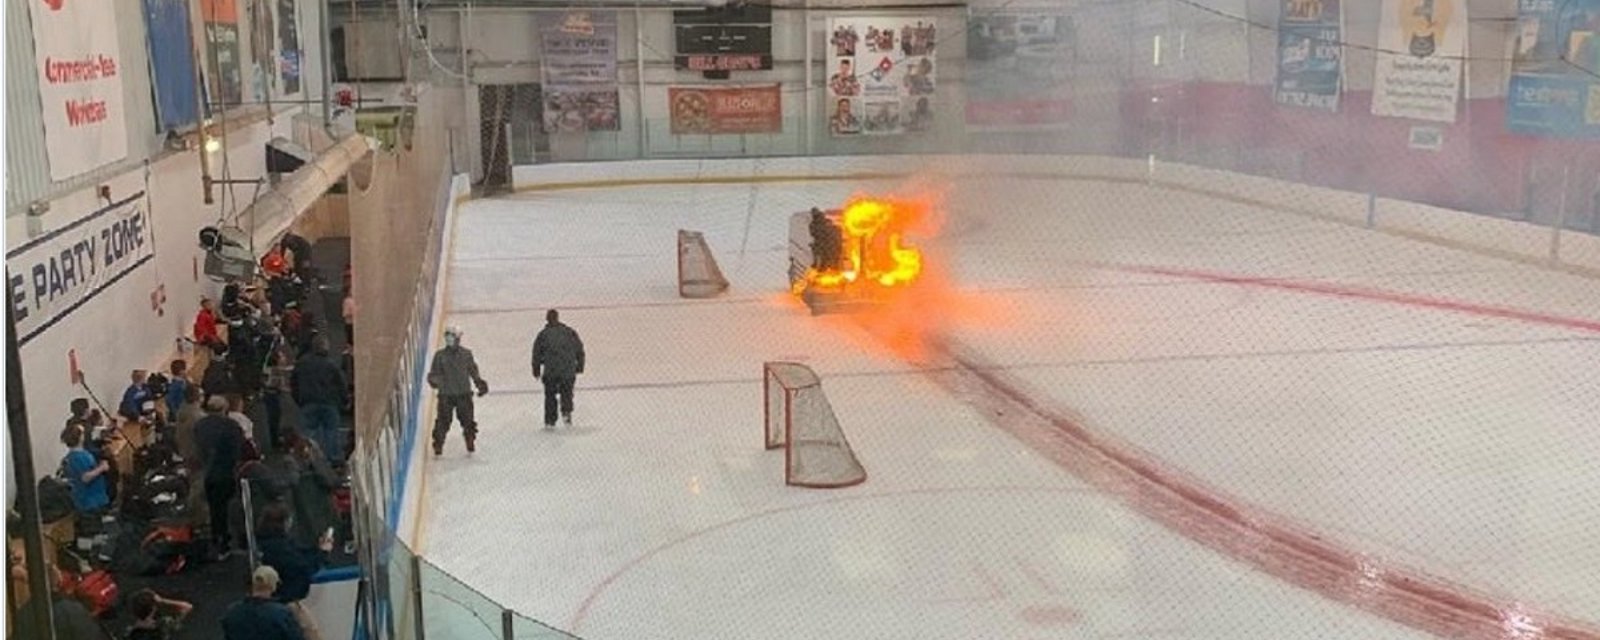 Flaming Zamboni steals the show at recent hockey event.